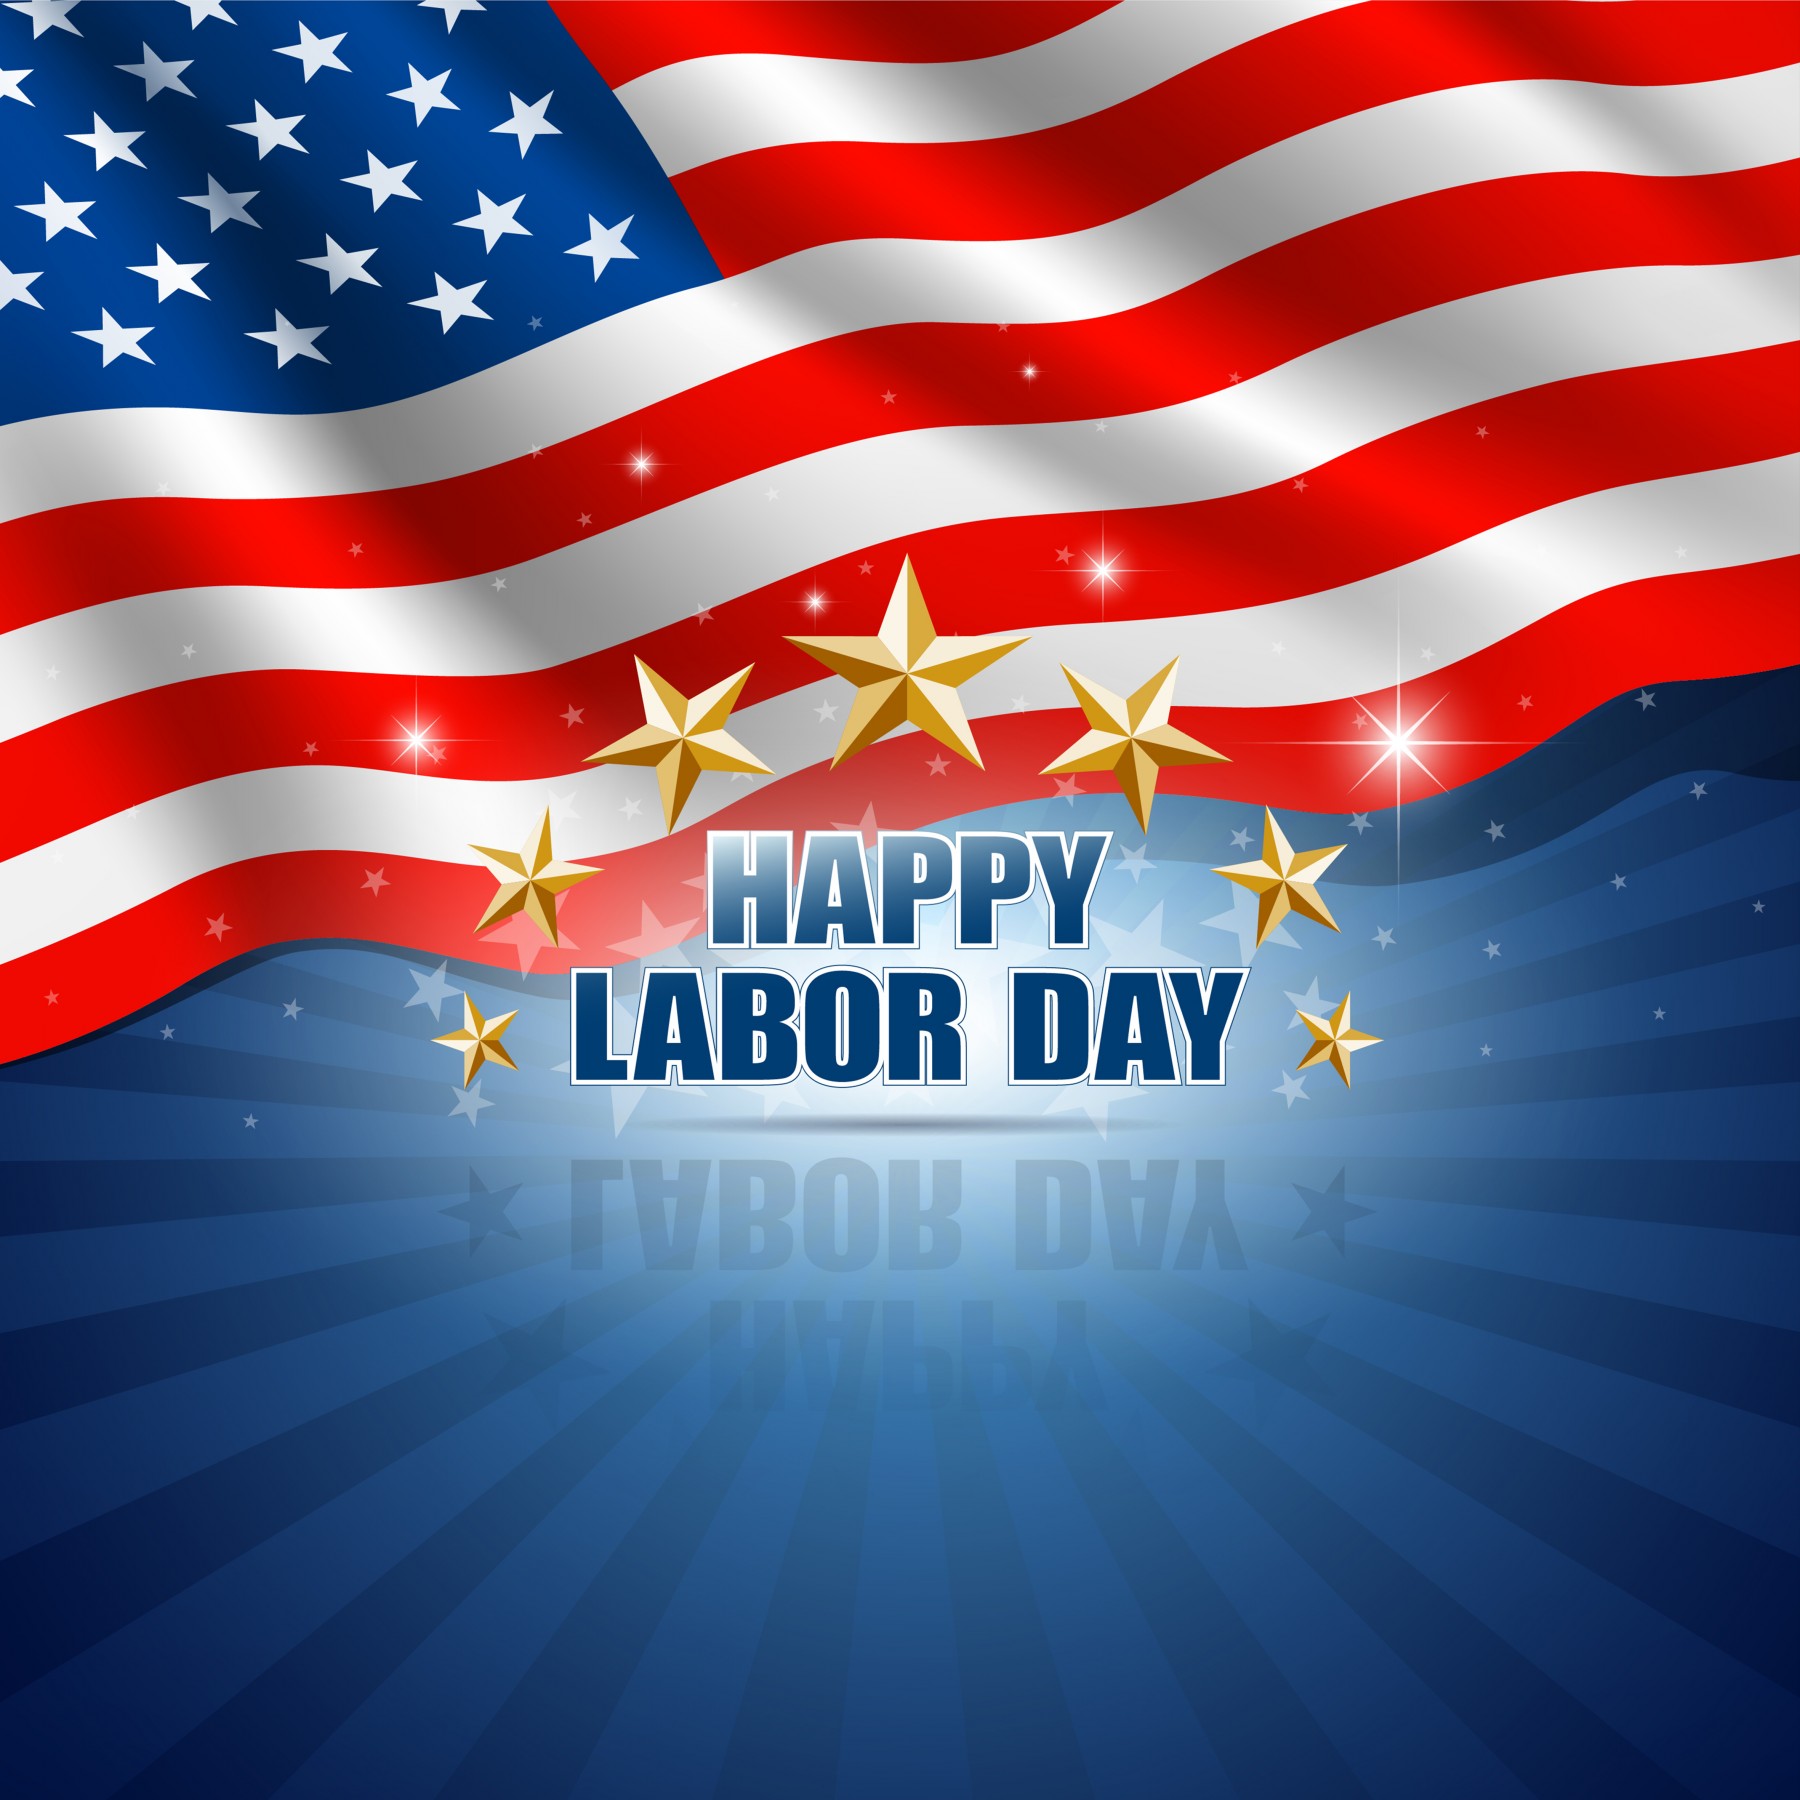 Happy Labor Day Wallpaper Image Thefemalecelebrity